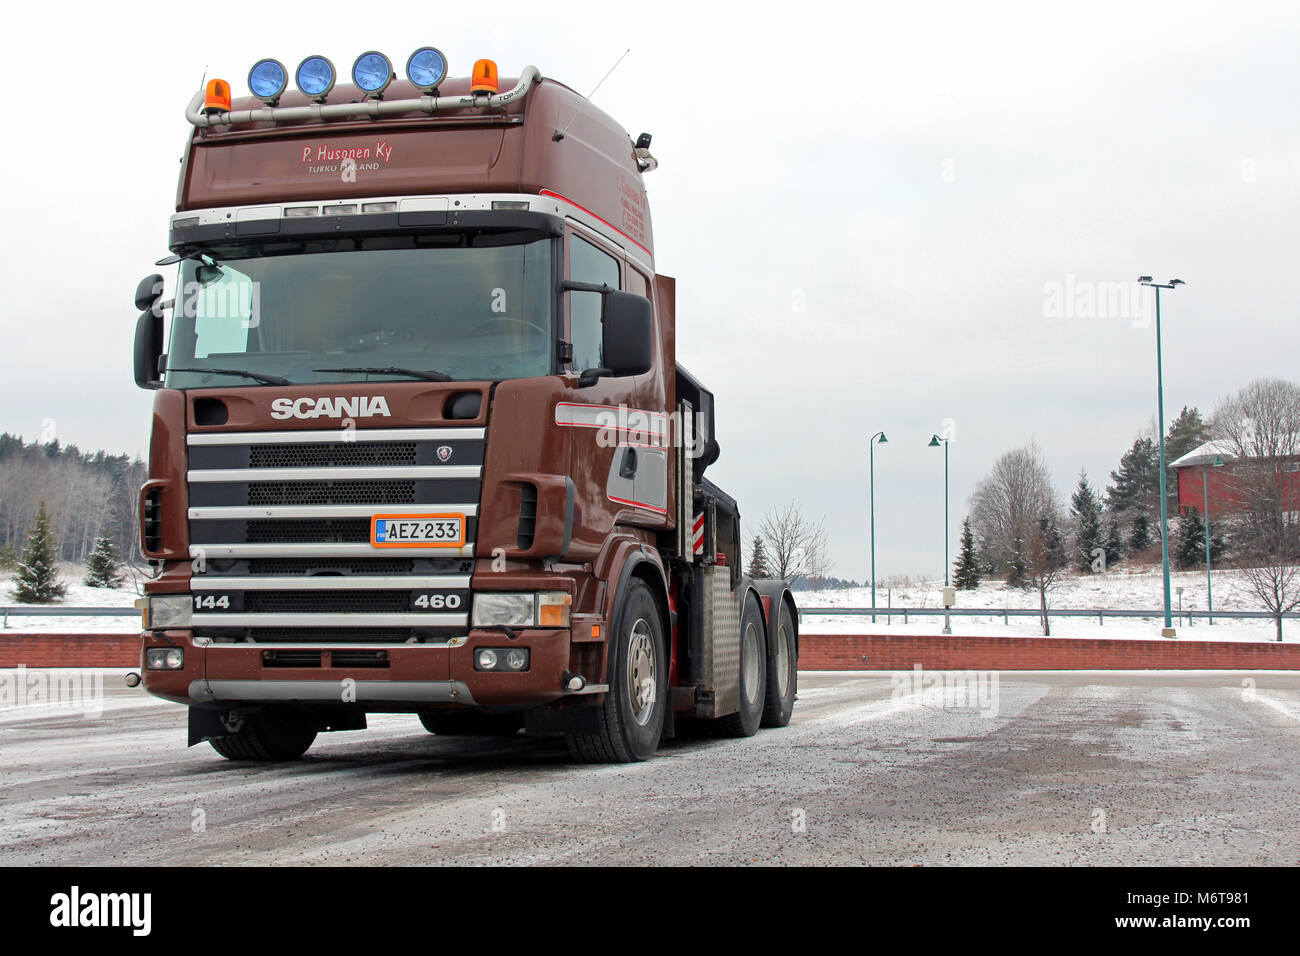 SALO, FINLAND - JANUARY 25, 2014: Scania 144 Truck tractor in arctic conditions. Scania is again ranked among the worlds 100 most sustainable corporat Stock Photo